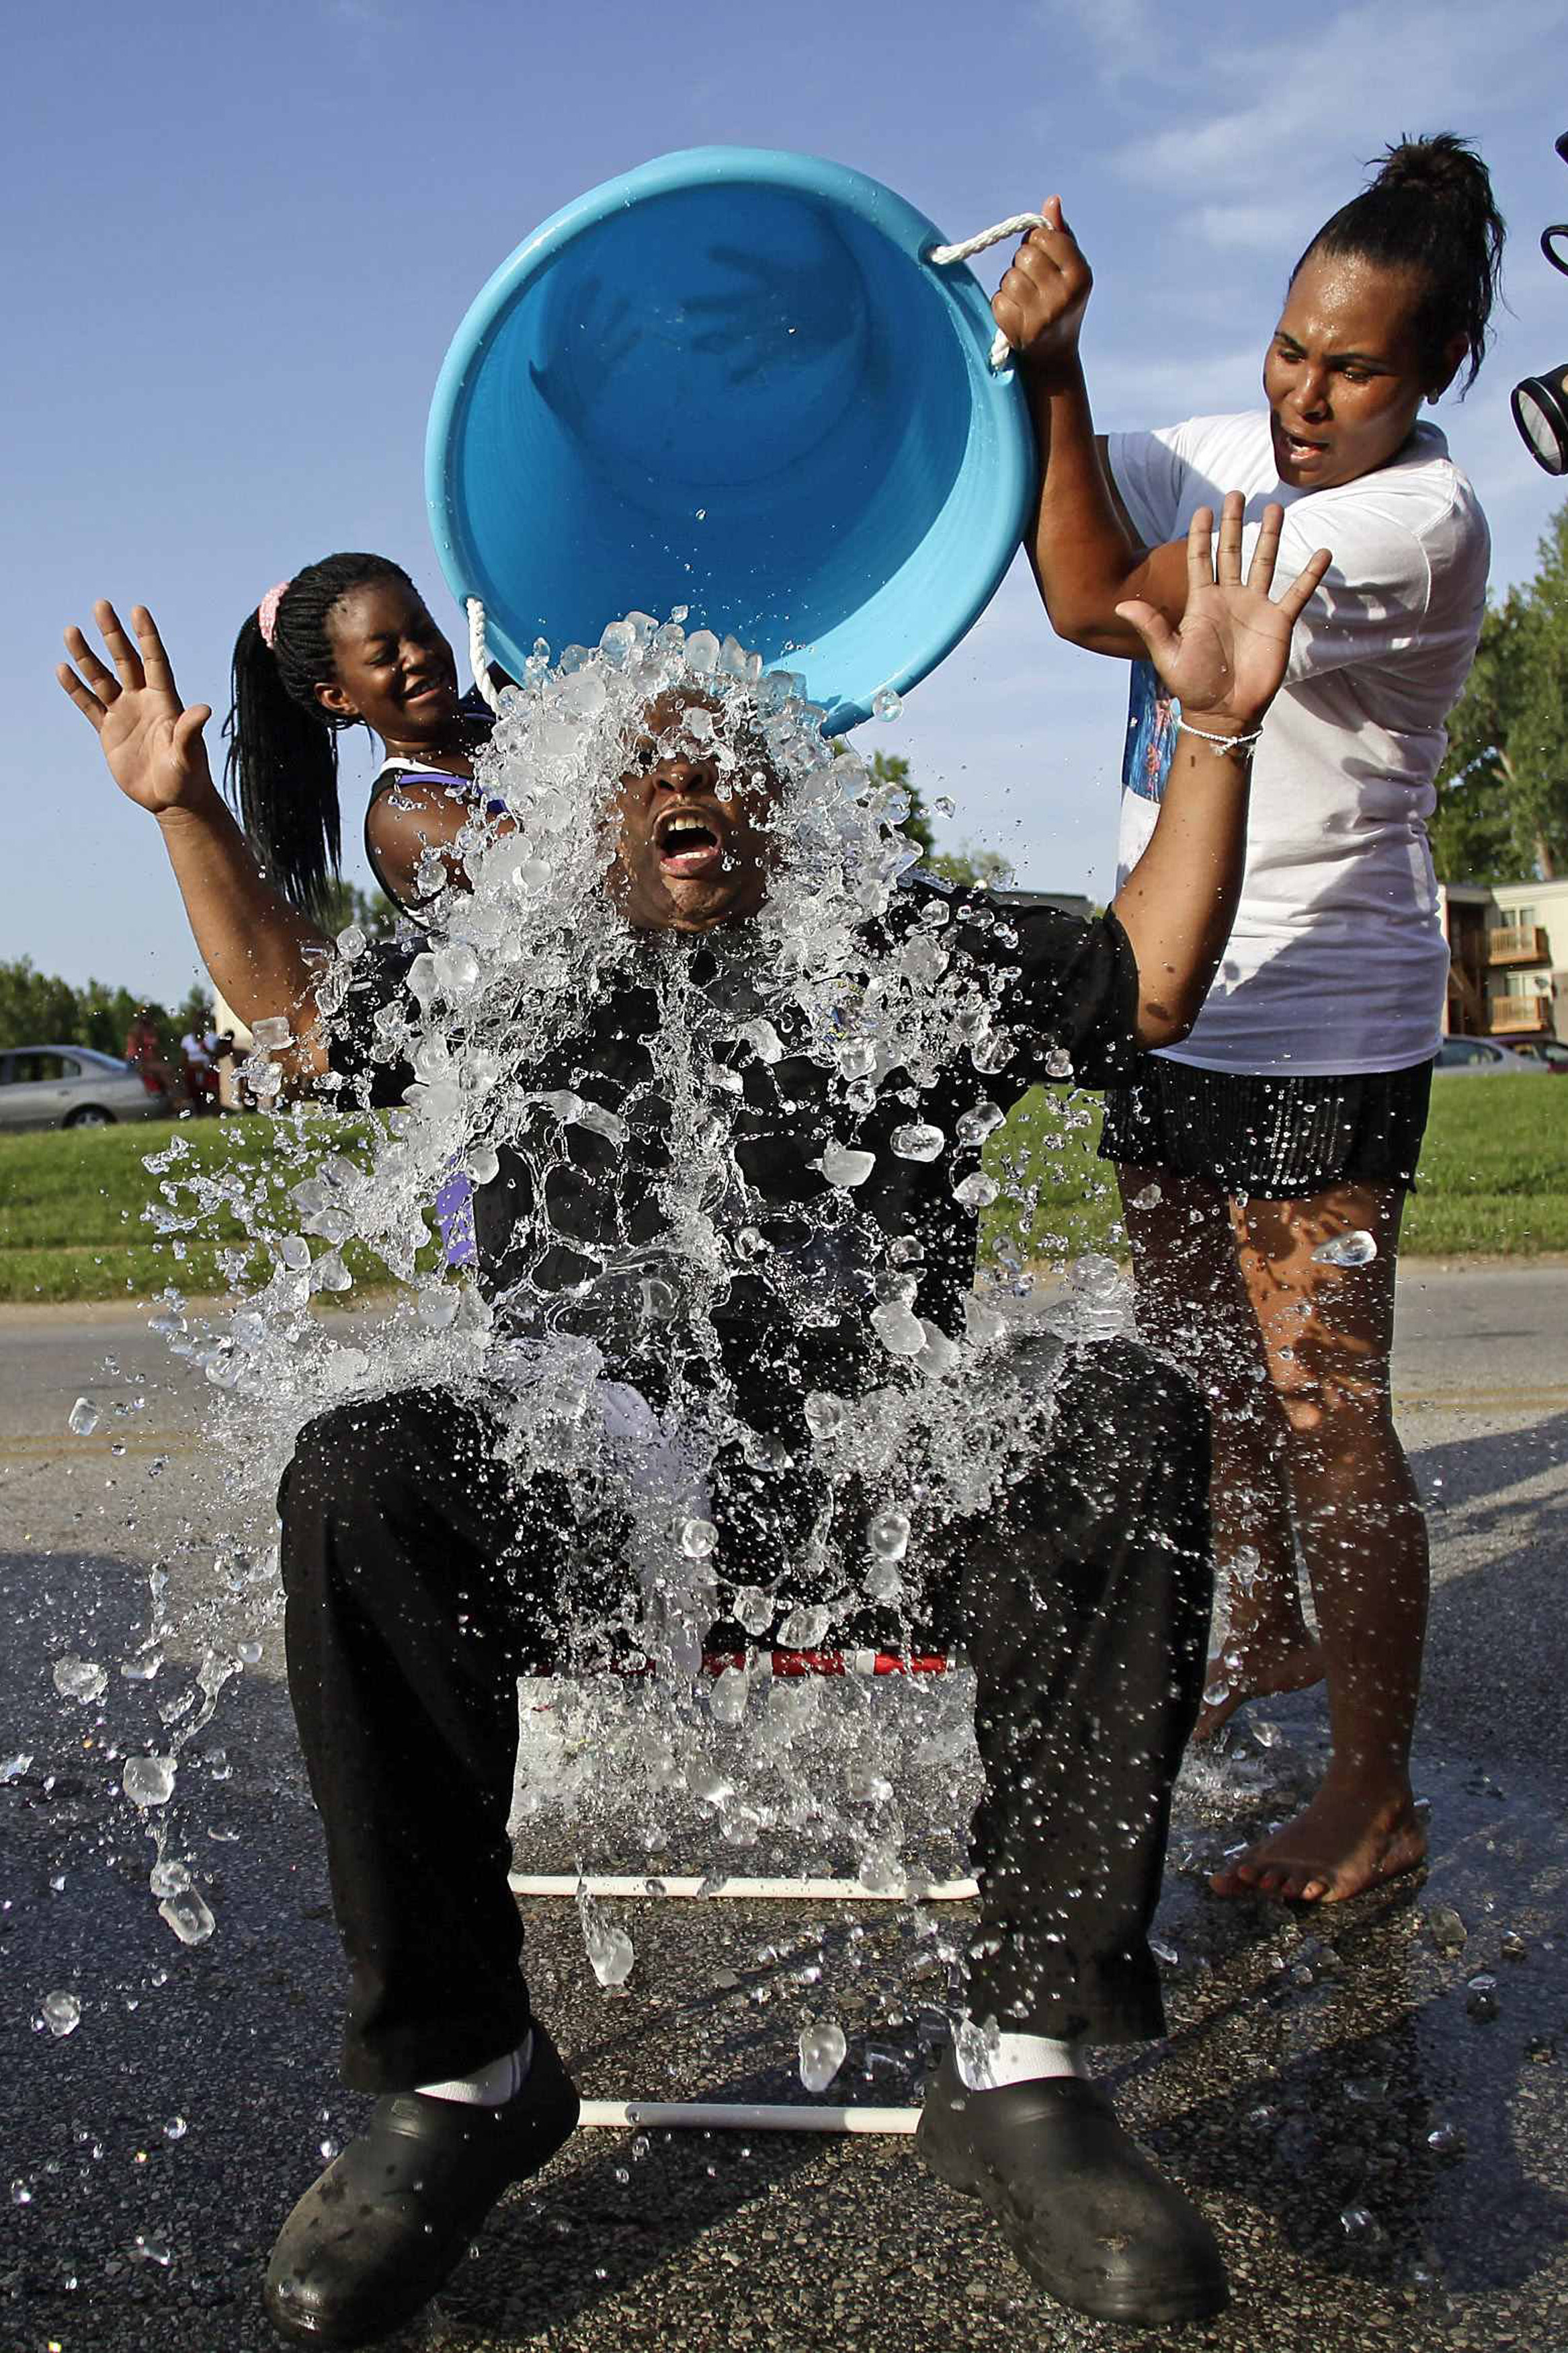 Supporters of Michael Brown, Kalisha Gilmore (L) and Recorida Kennedy (R), pour ice water on Kevin Ephron as he takes the ice bucket challenge in remembrance of Brown along Canfield Drive, where he was fatally shot by a police officer in Ferguson, Missouri August 24, 2014. (Joshua Lott—Reuters)